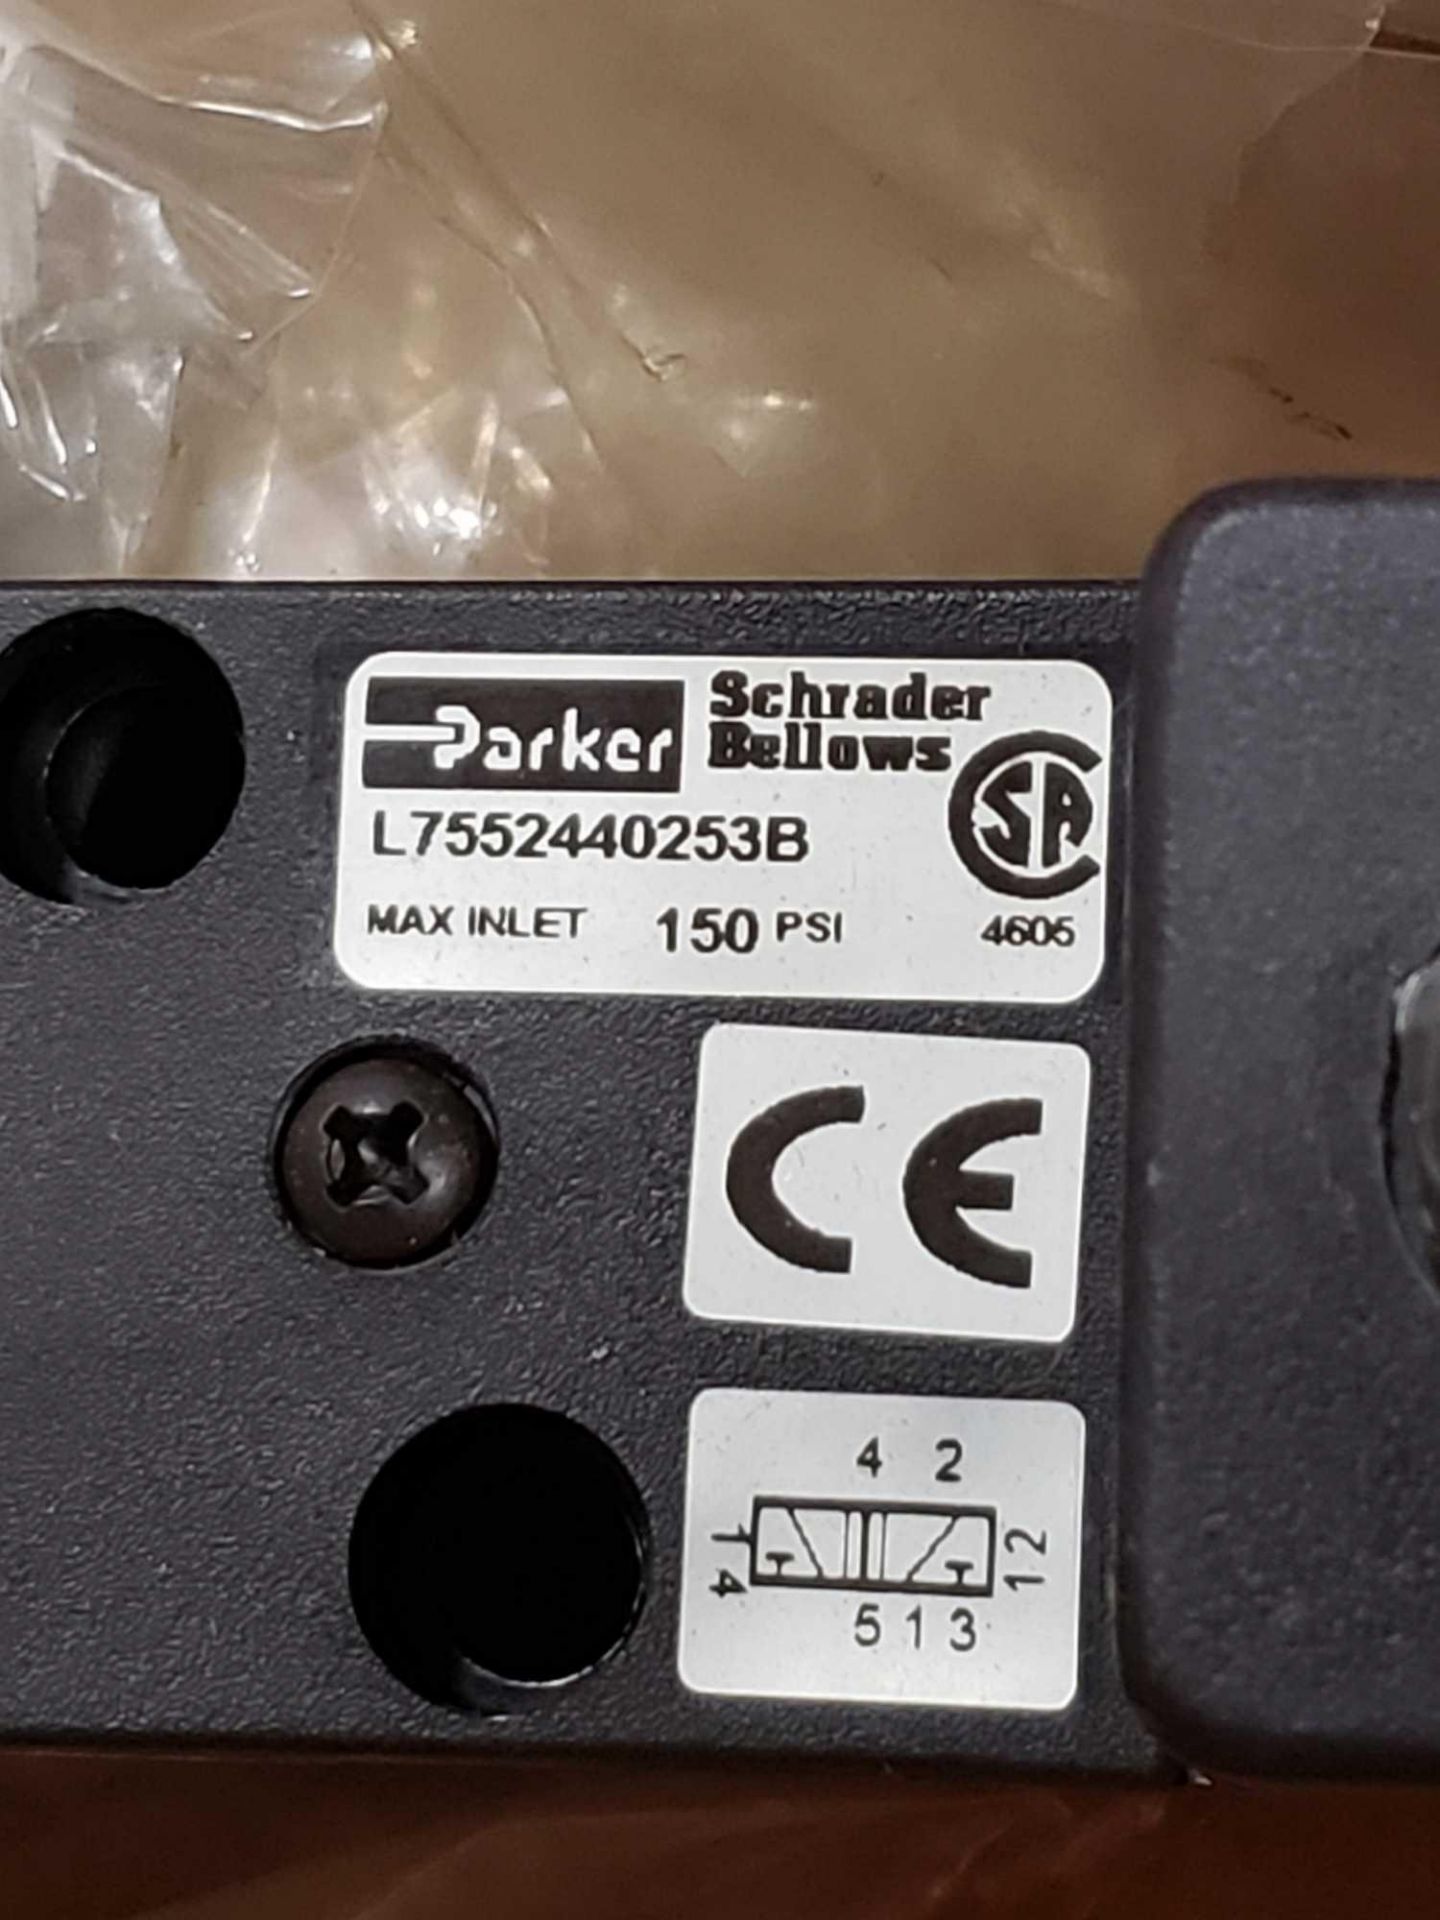 Parker Schrader Bellows pneumatic valve model L7552440253B. New as pictured. - Image 2 of 3